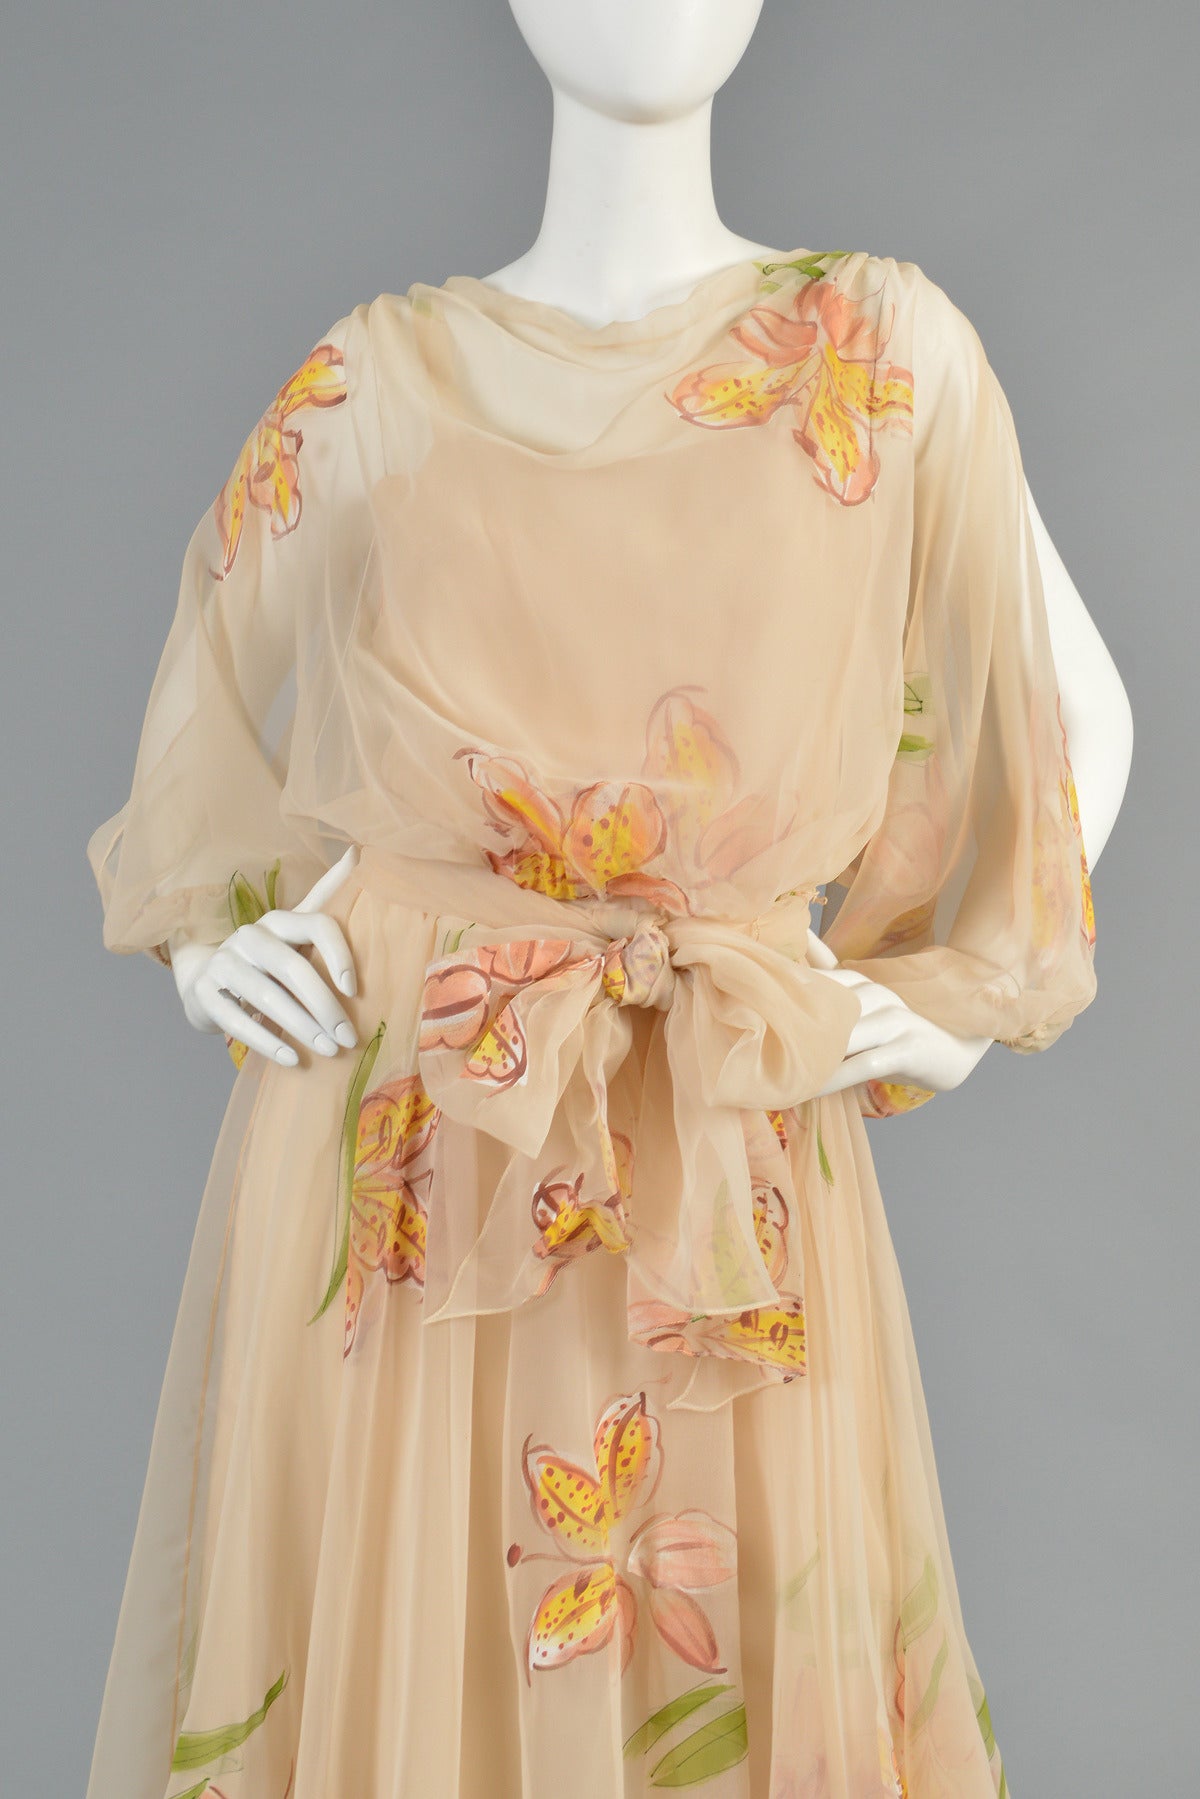 Mignon 1970's Hand Painted Floral Chiffon Dress with Open Sleeves 1